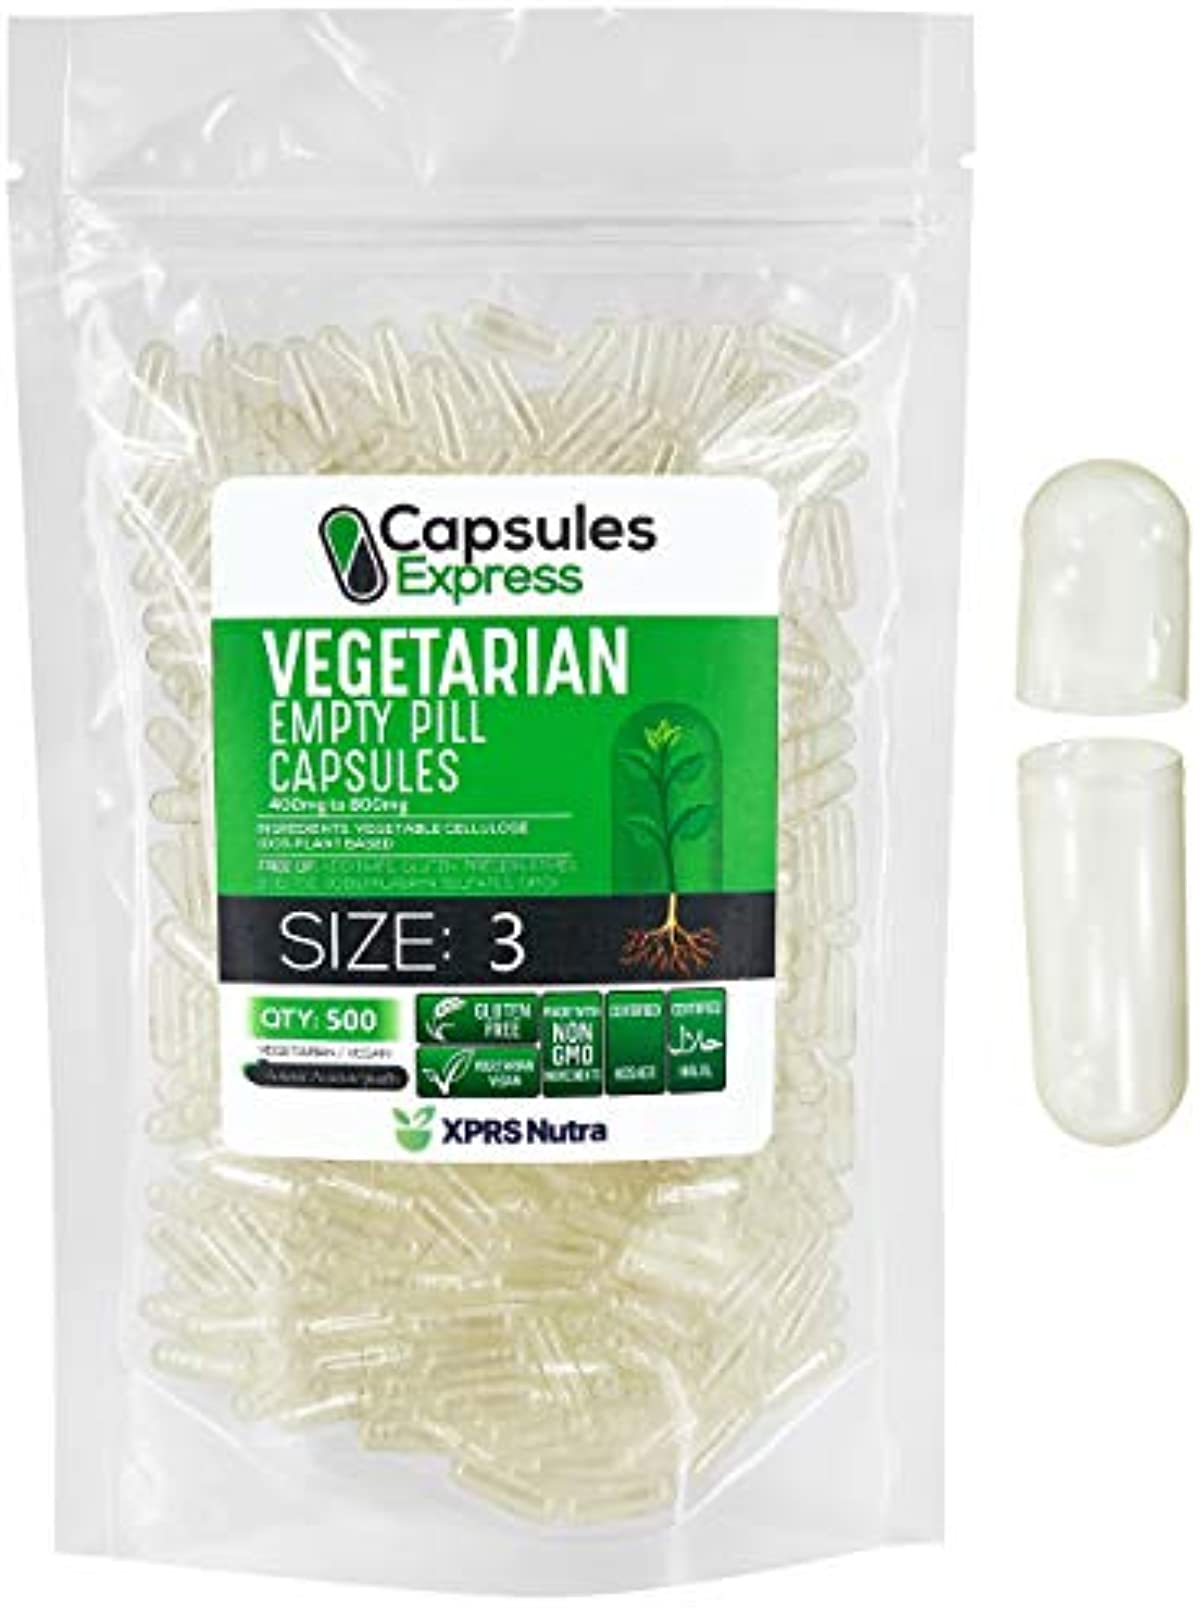 XPRS Nutra Size 3 Empty Capsules - 500 Count Clear Empty Vegan Capsules - Capsules Express Vegetarian Empty Pill Capsules- DIY Vegetable Capsule Filling- Veggie Pill Capsules Empty Caps